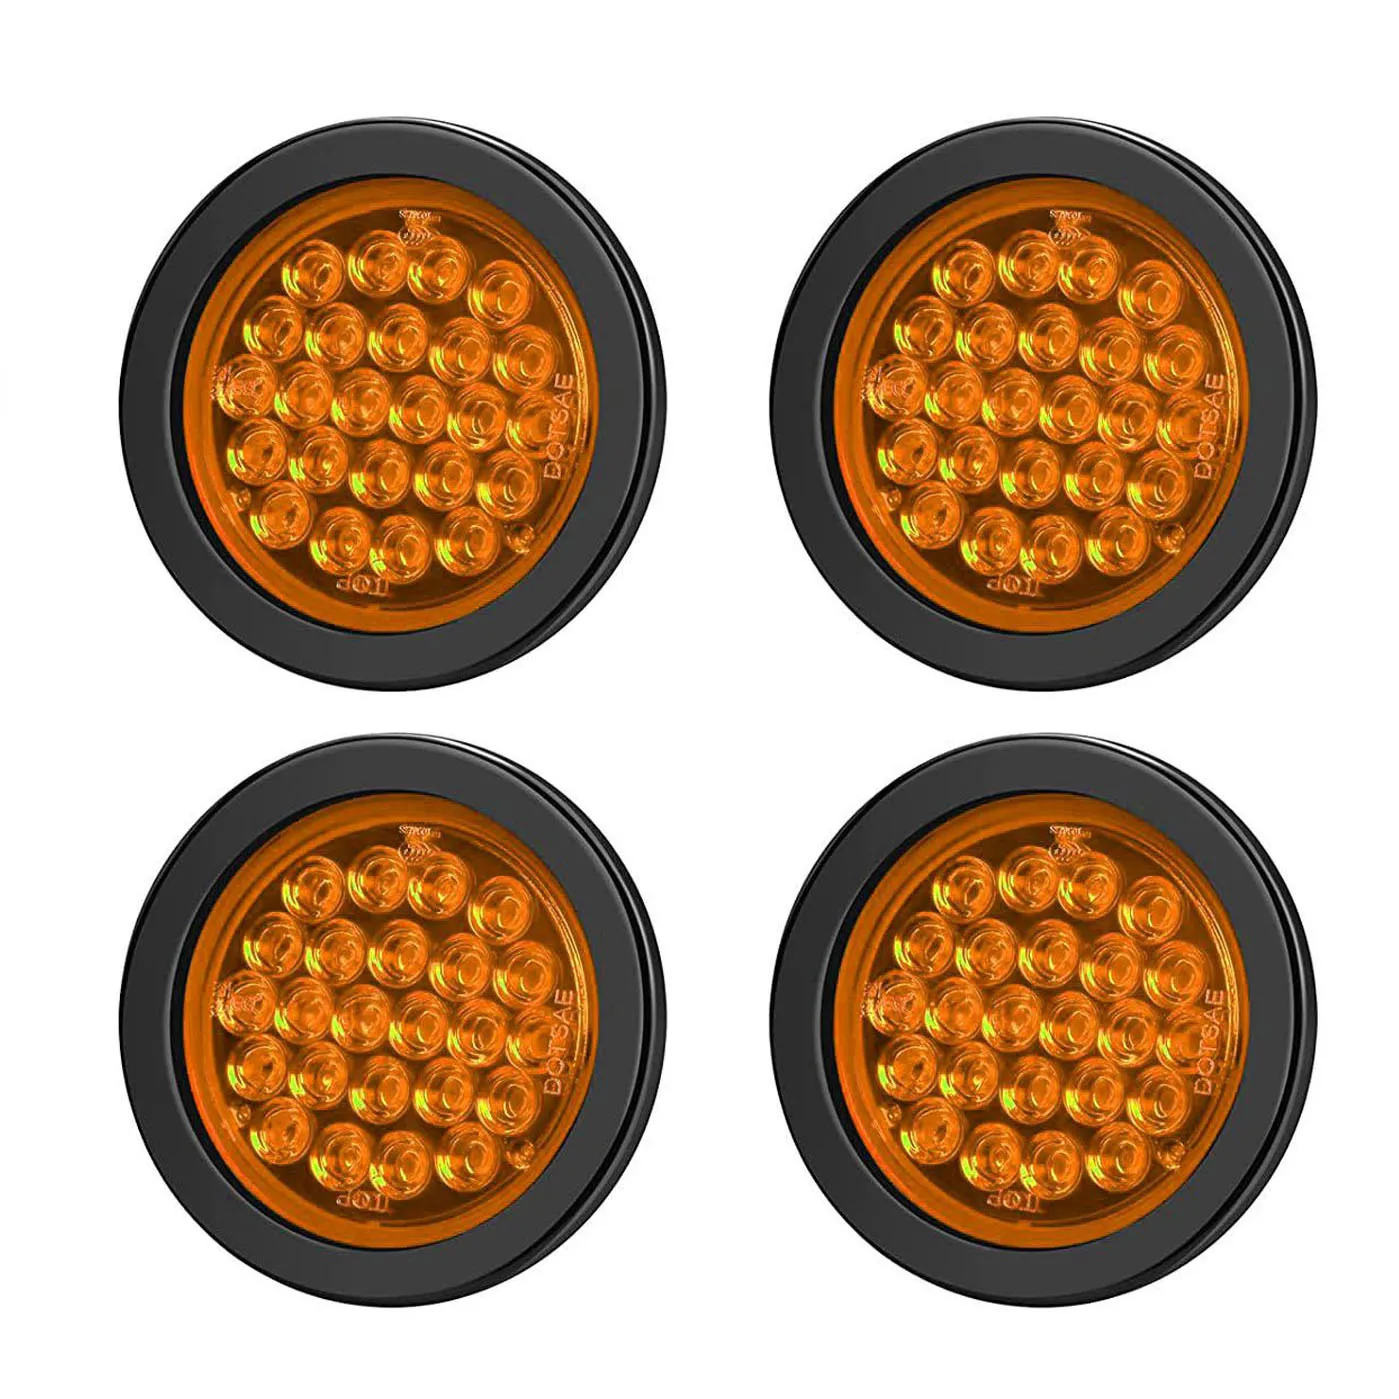 

4 Inch Round Trailer Tail Lights 24LED Stop Turn Tail Lights for Boat Truck RV Tractor Bus 4 Packs Amber Yellow